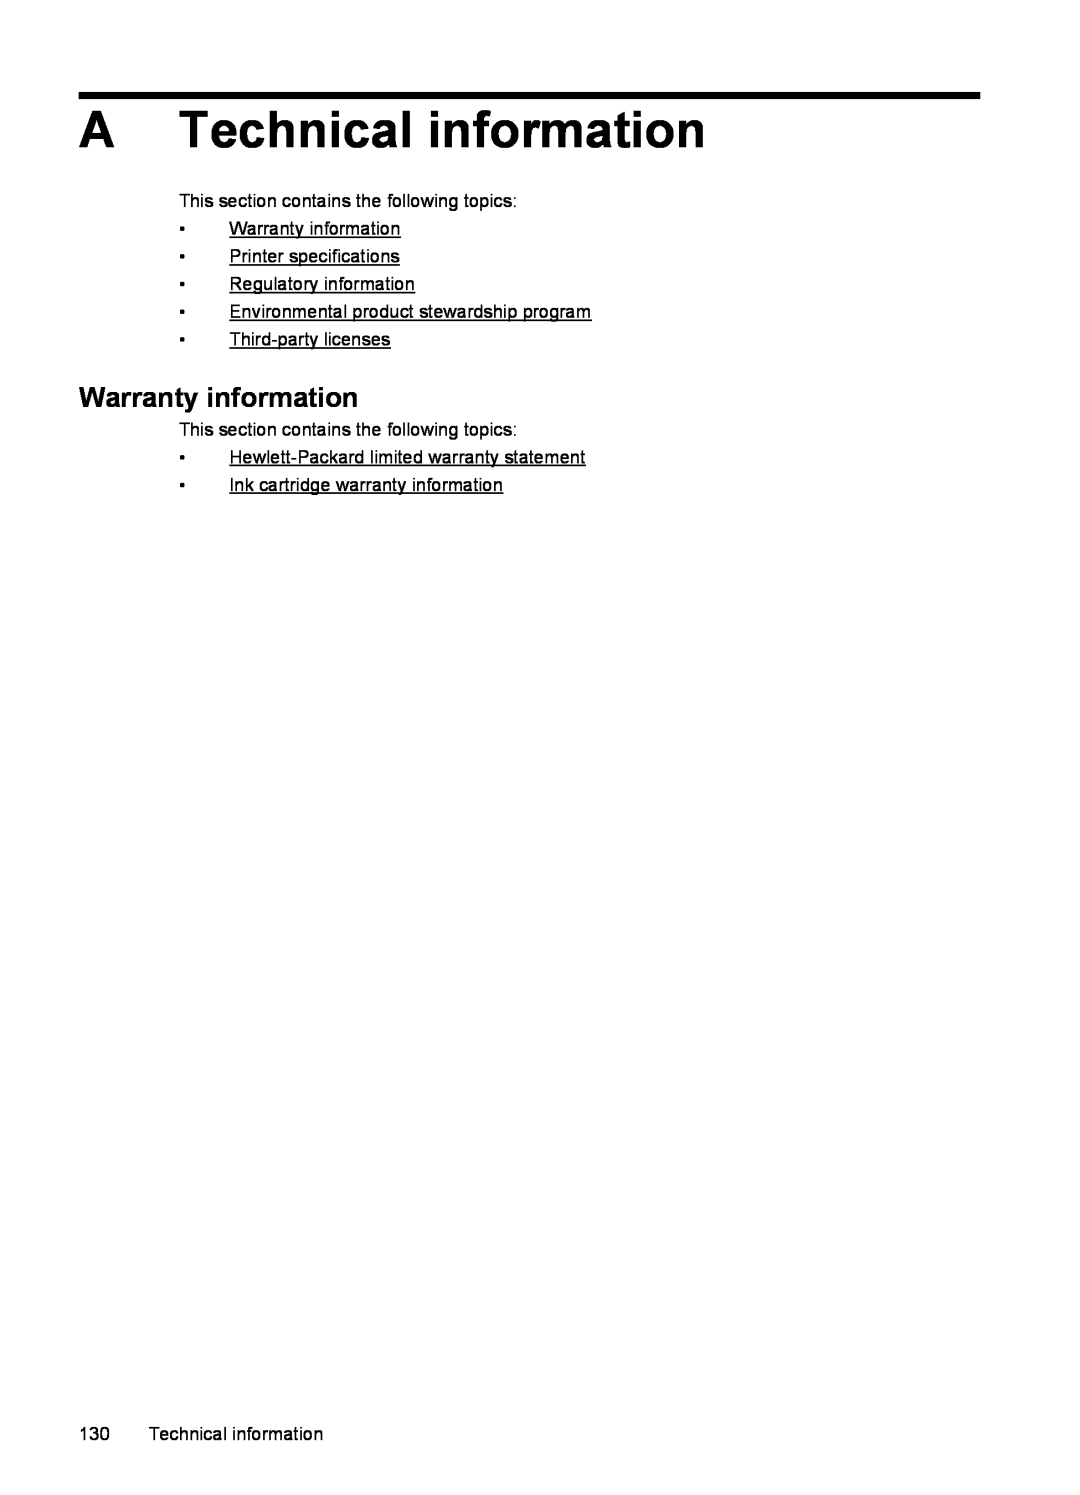 HP 6600 - H7 manual A Technical information, Warranty information 